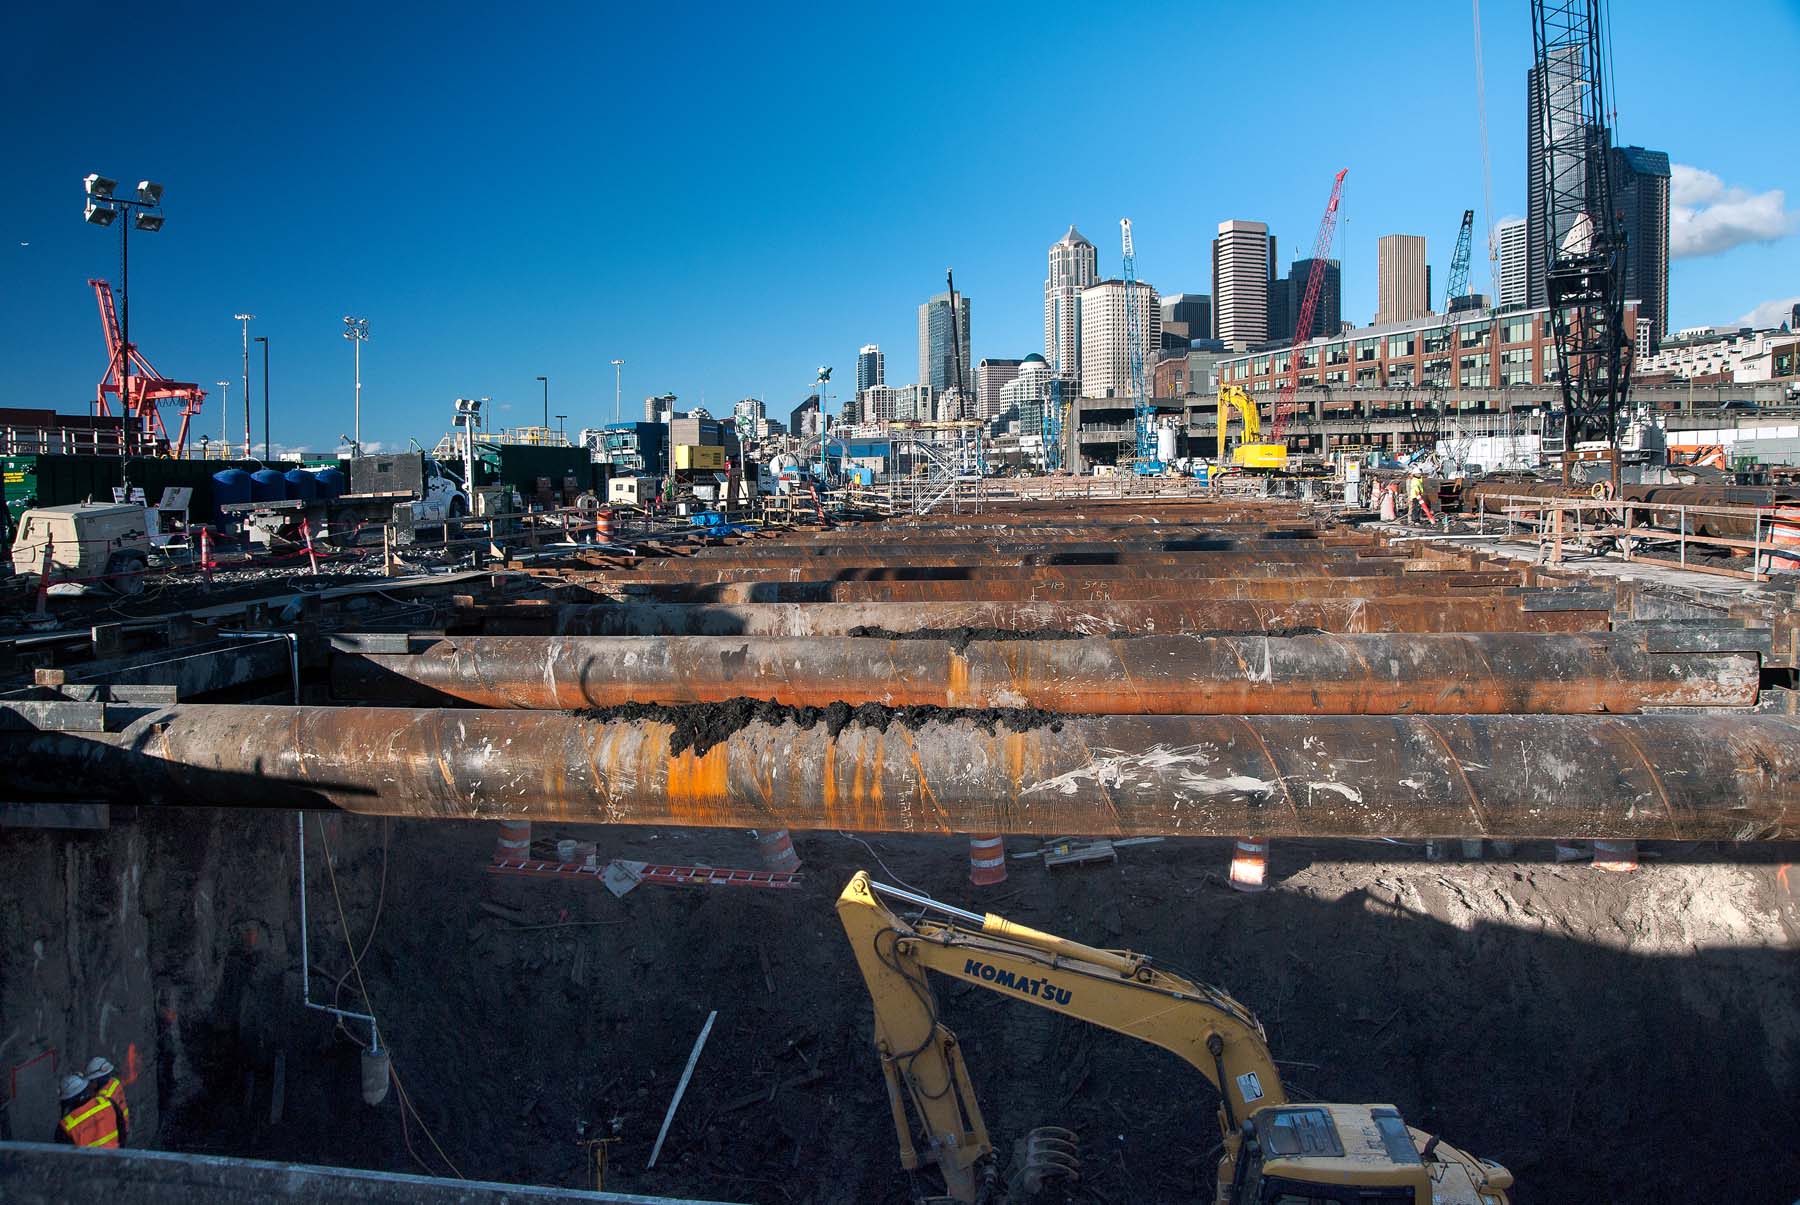 SR-99 Tunnel Excavation: Cut-and-Cover Roadways